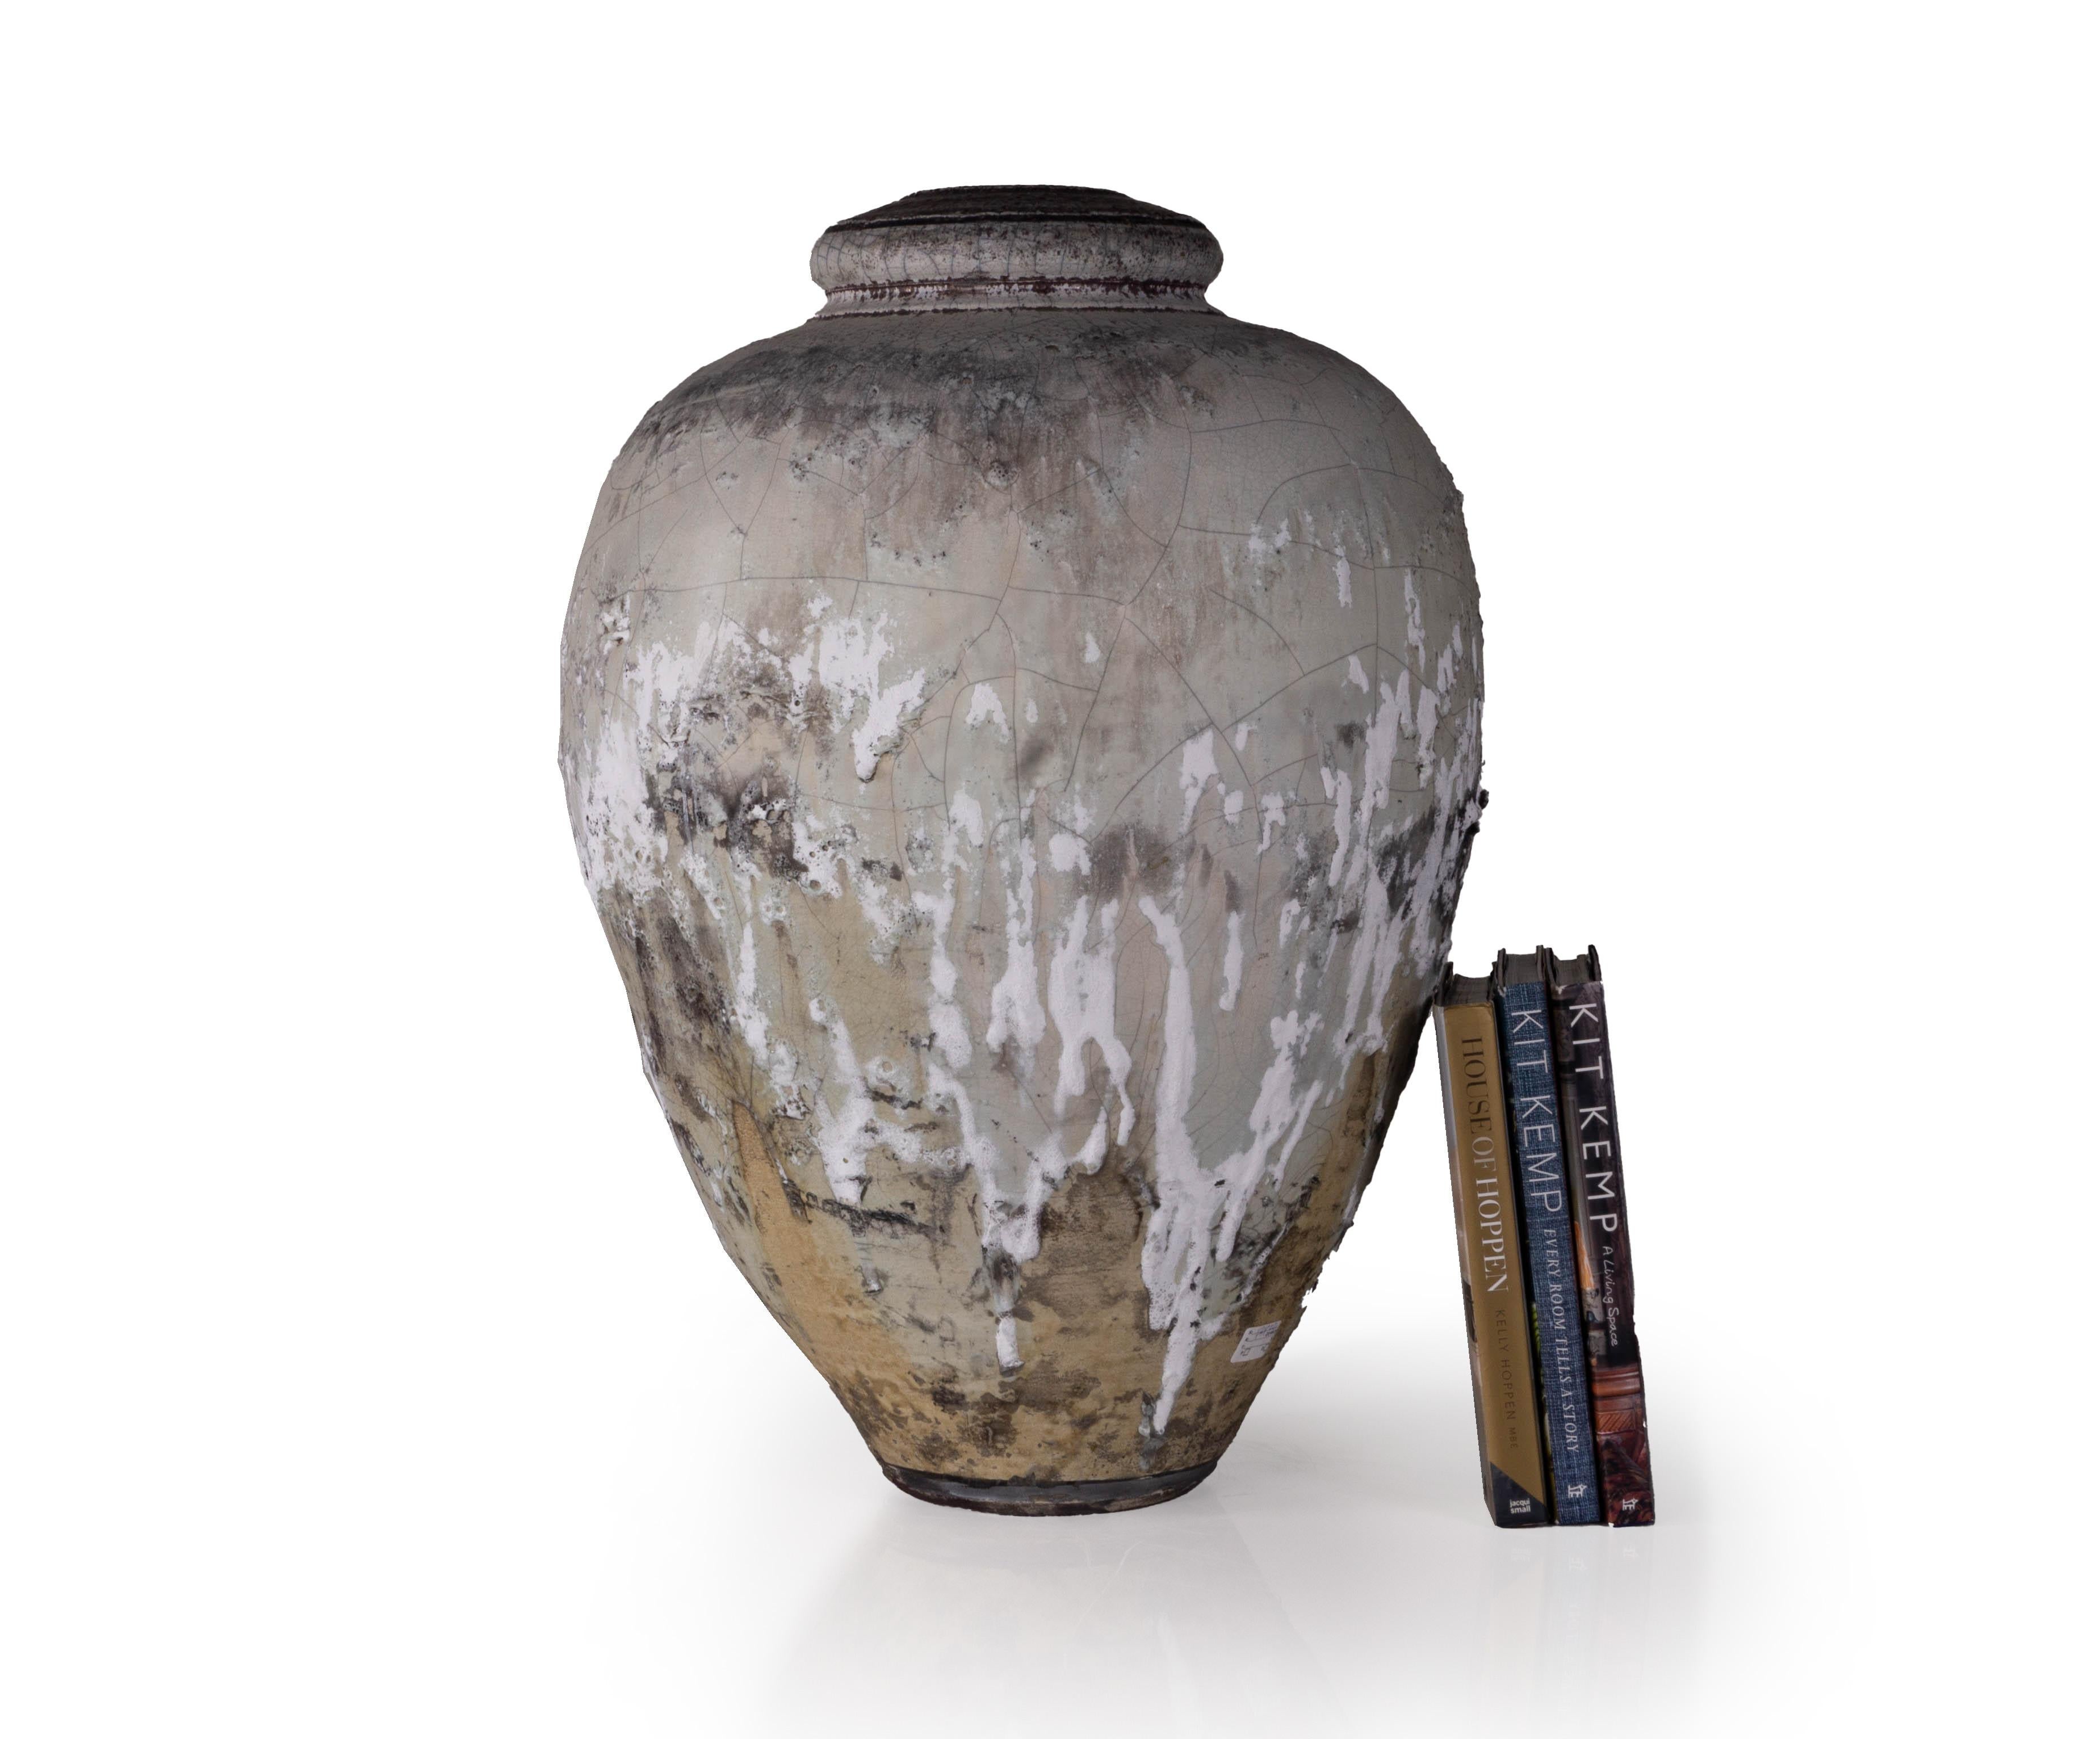 This large vintage raku fired studio pottery vase is a spectacular addition to any contemporary or mid-century modern home. This piece beautifully reflects traditional raku style pottery in which clay is removed from the kiln at the height of firing